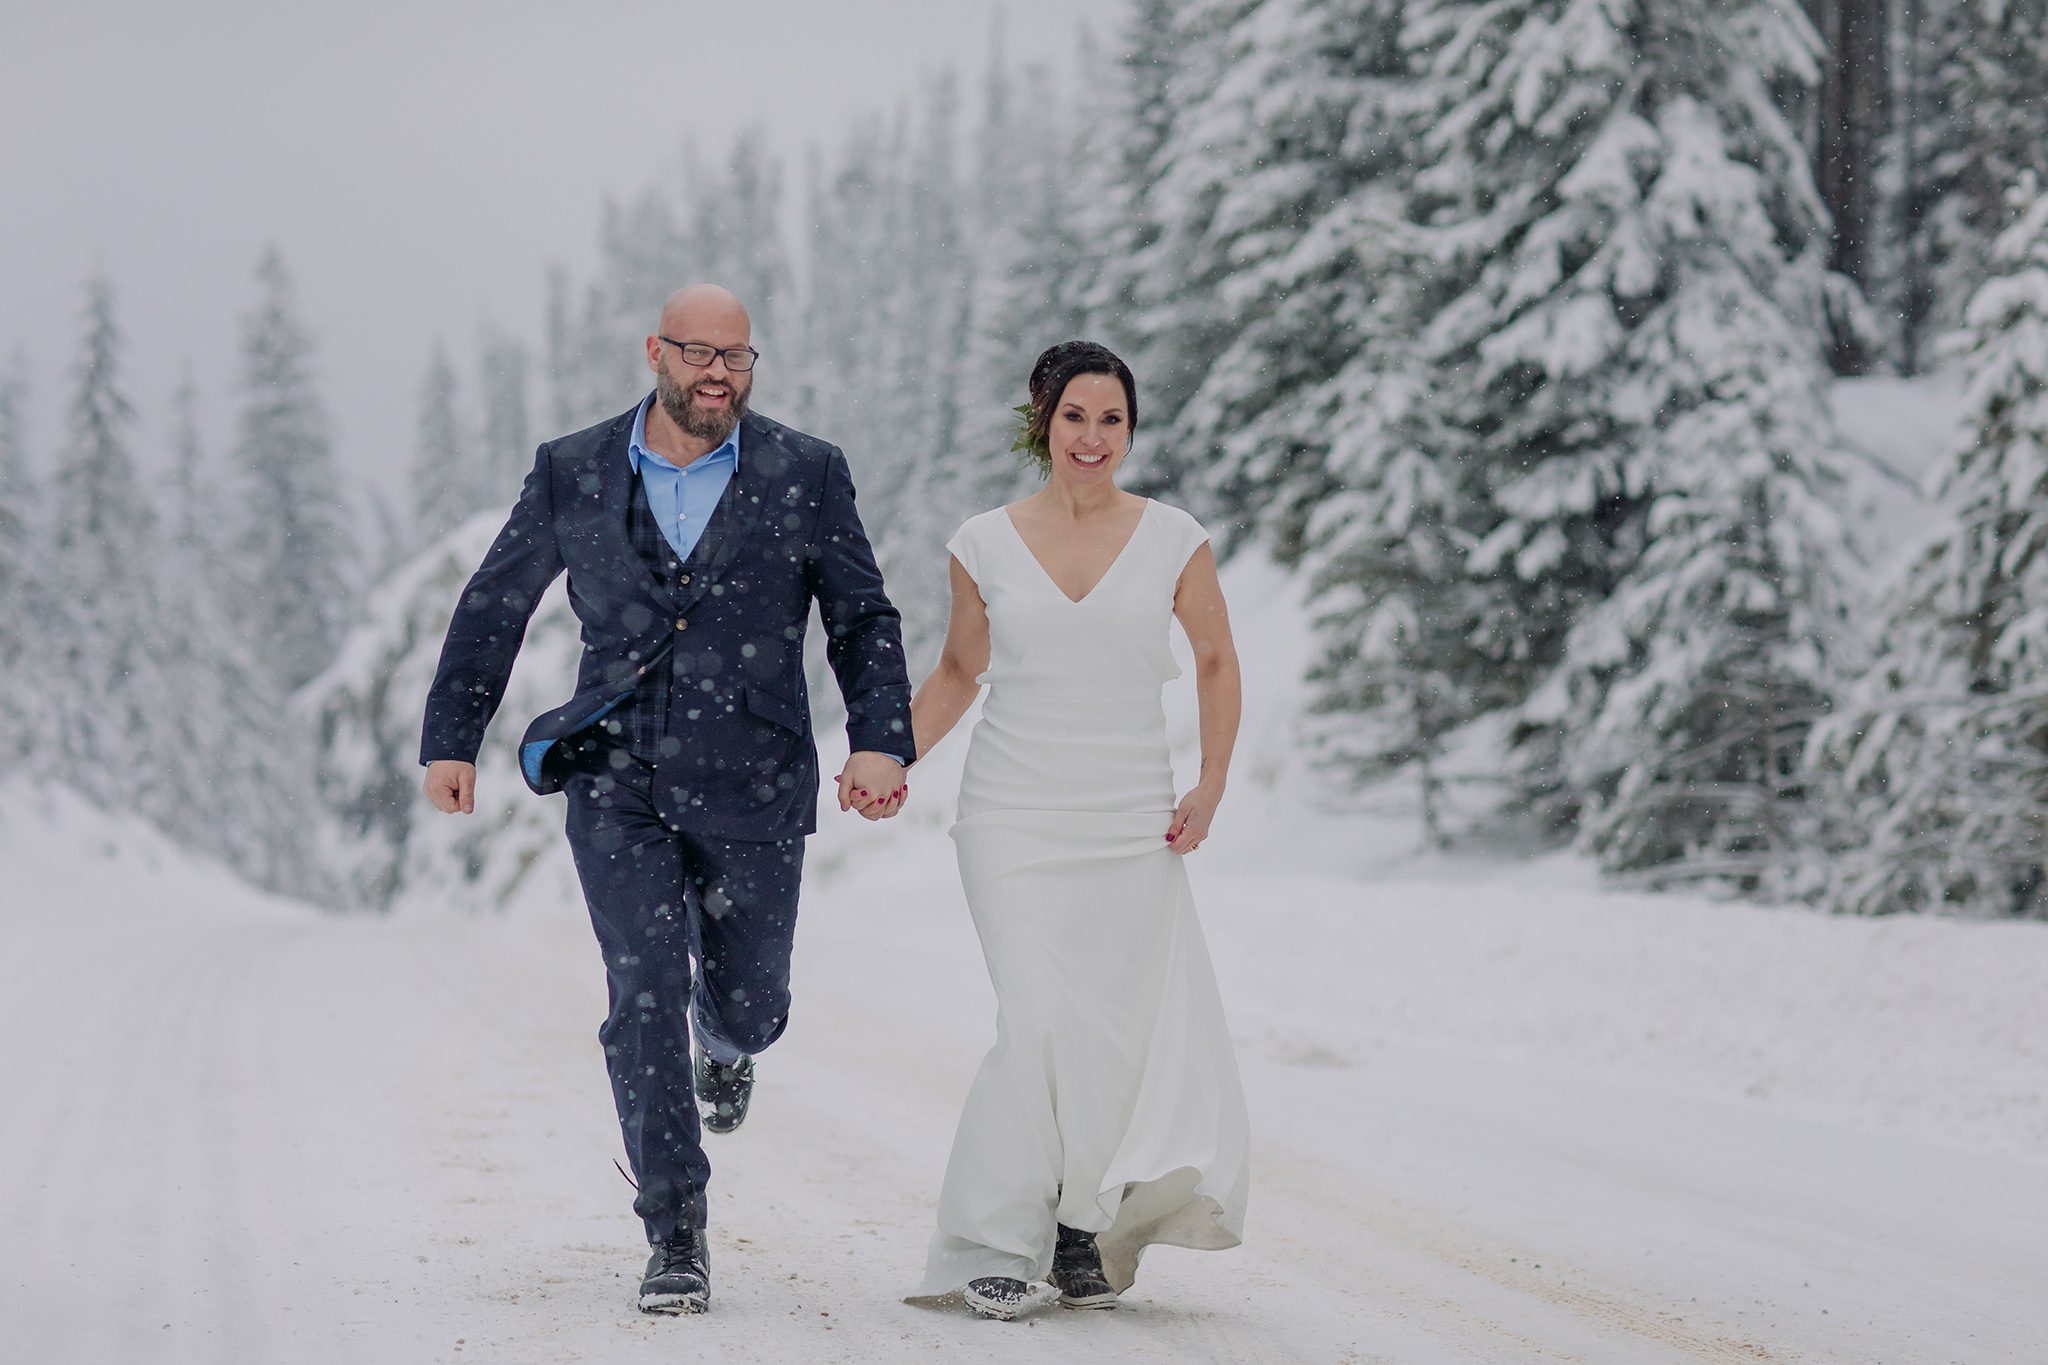 snowy mountain elopement outdoor bride & groom portraits with falling snow photographed by mountain elopement & wedding photographer ENV Photography